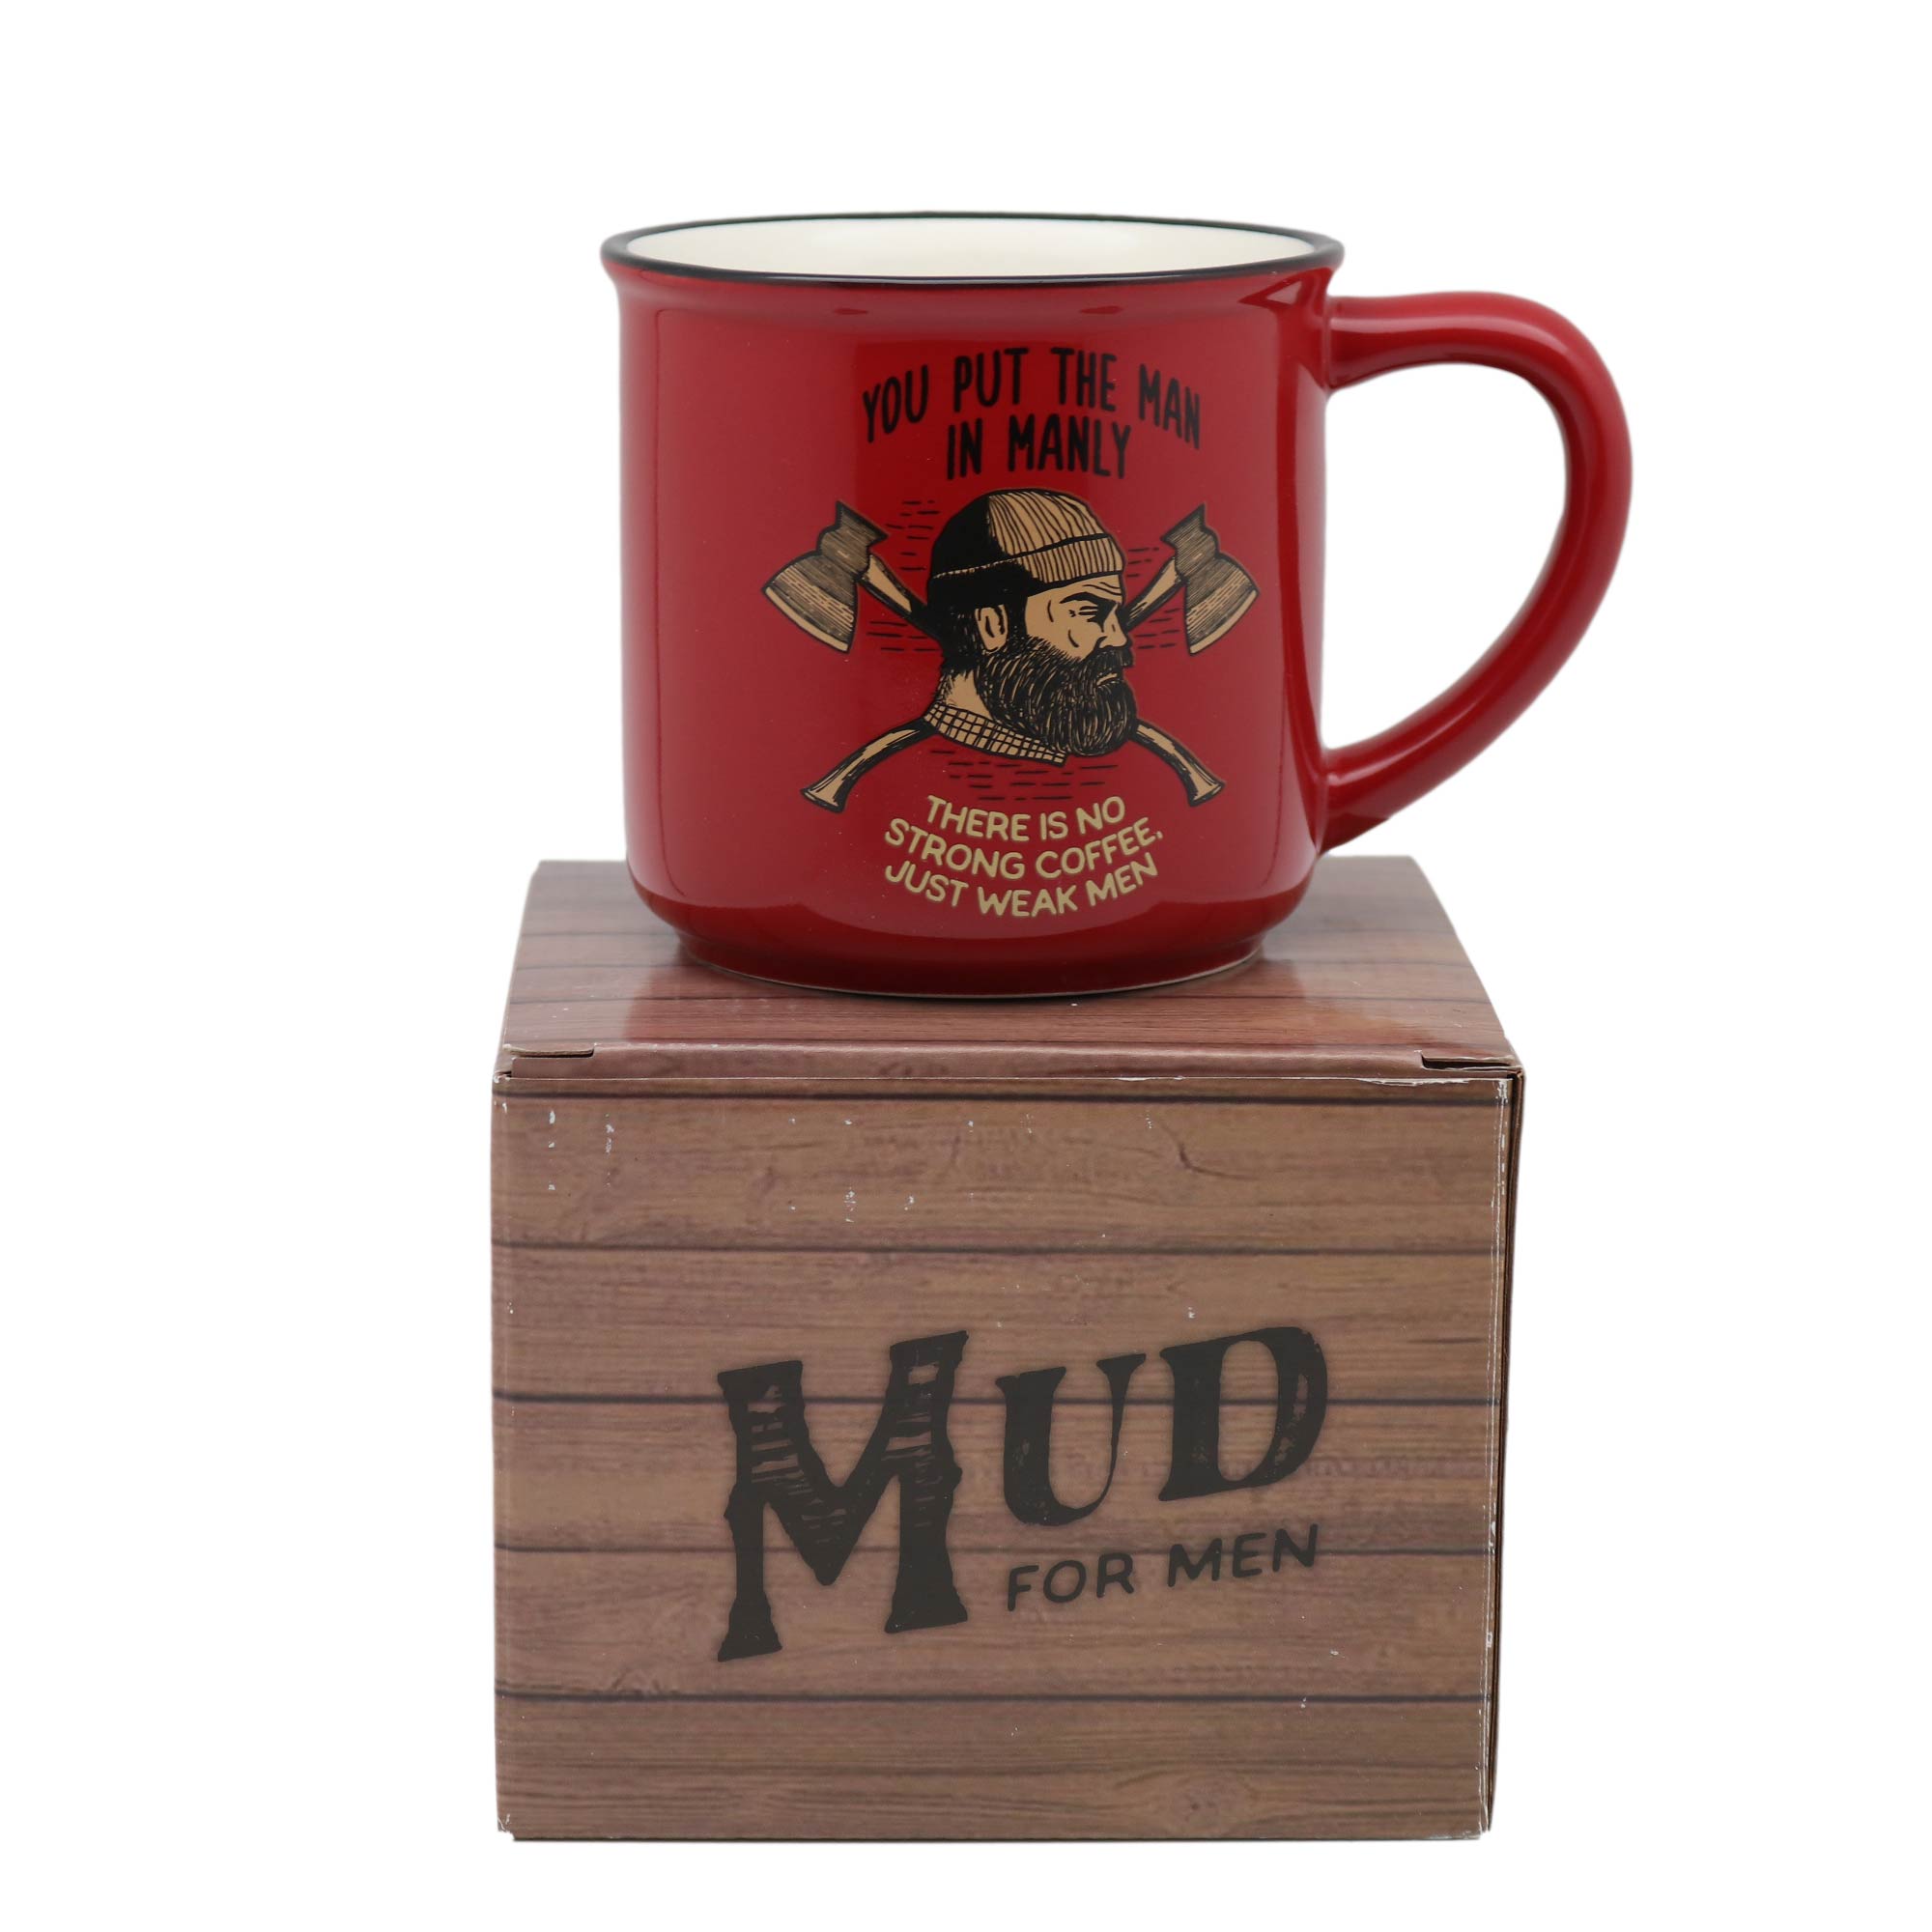 Top Guy Mugs - There is No STRONG COFFEE only Weak Men